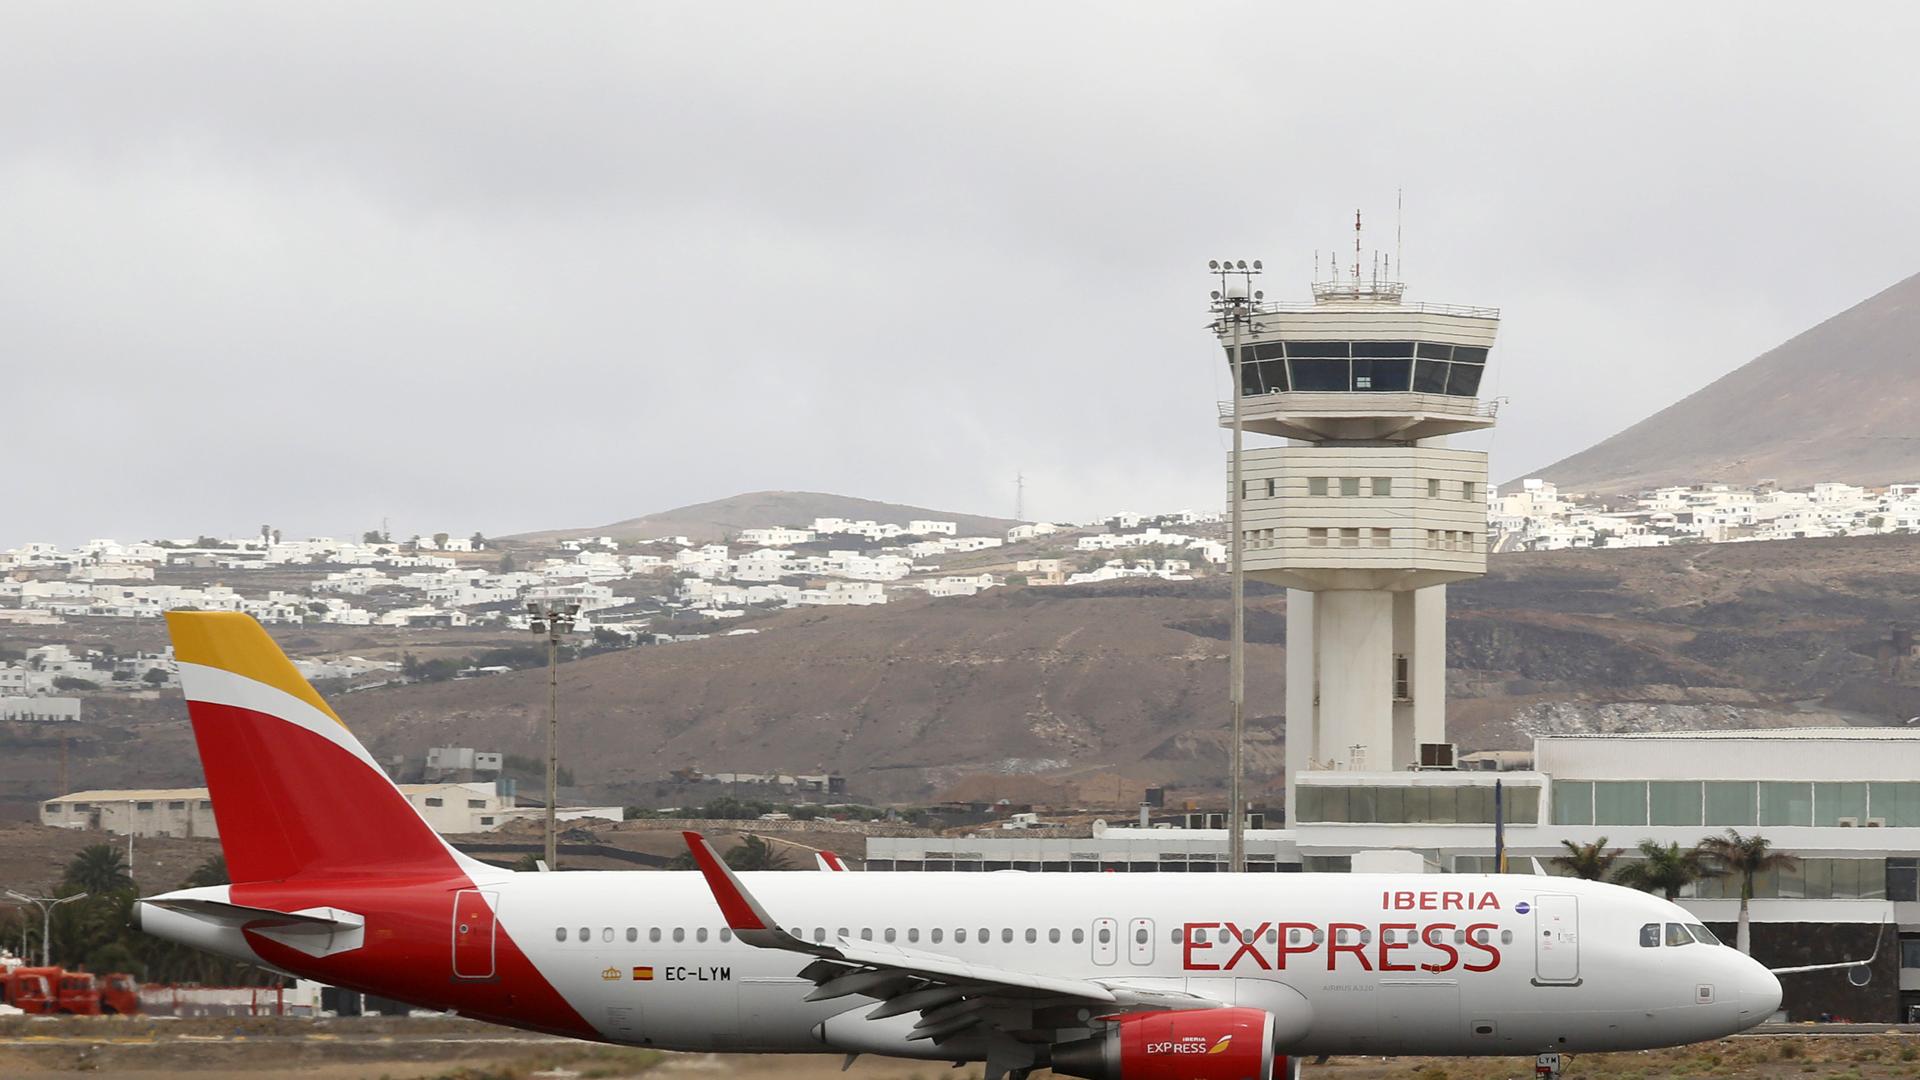 Iberia Express extends its offer to the Canary Islands with flights to Cairo and Marrakech